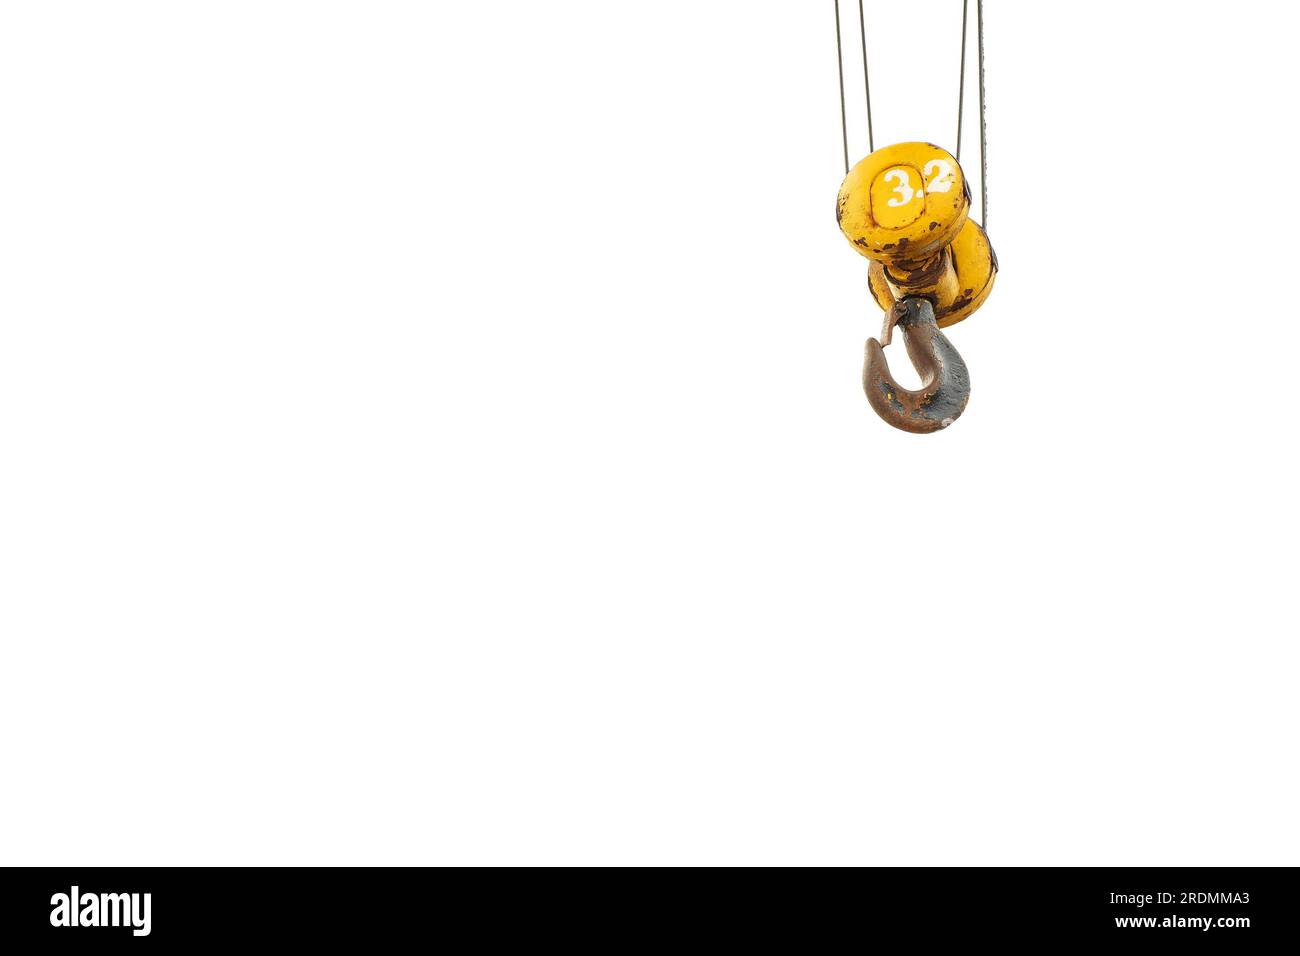 A crane hook with marked SWL - safe working load; building site safety regulations. Stock Photo